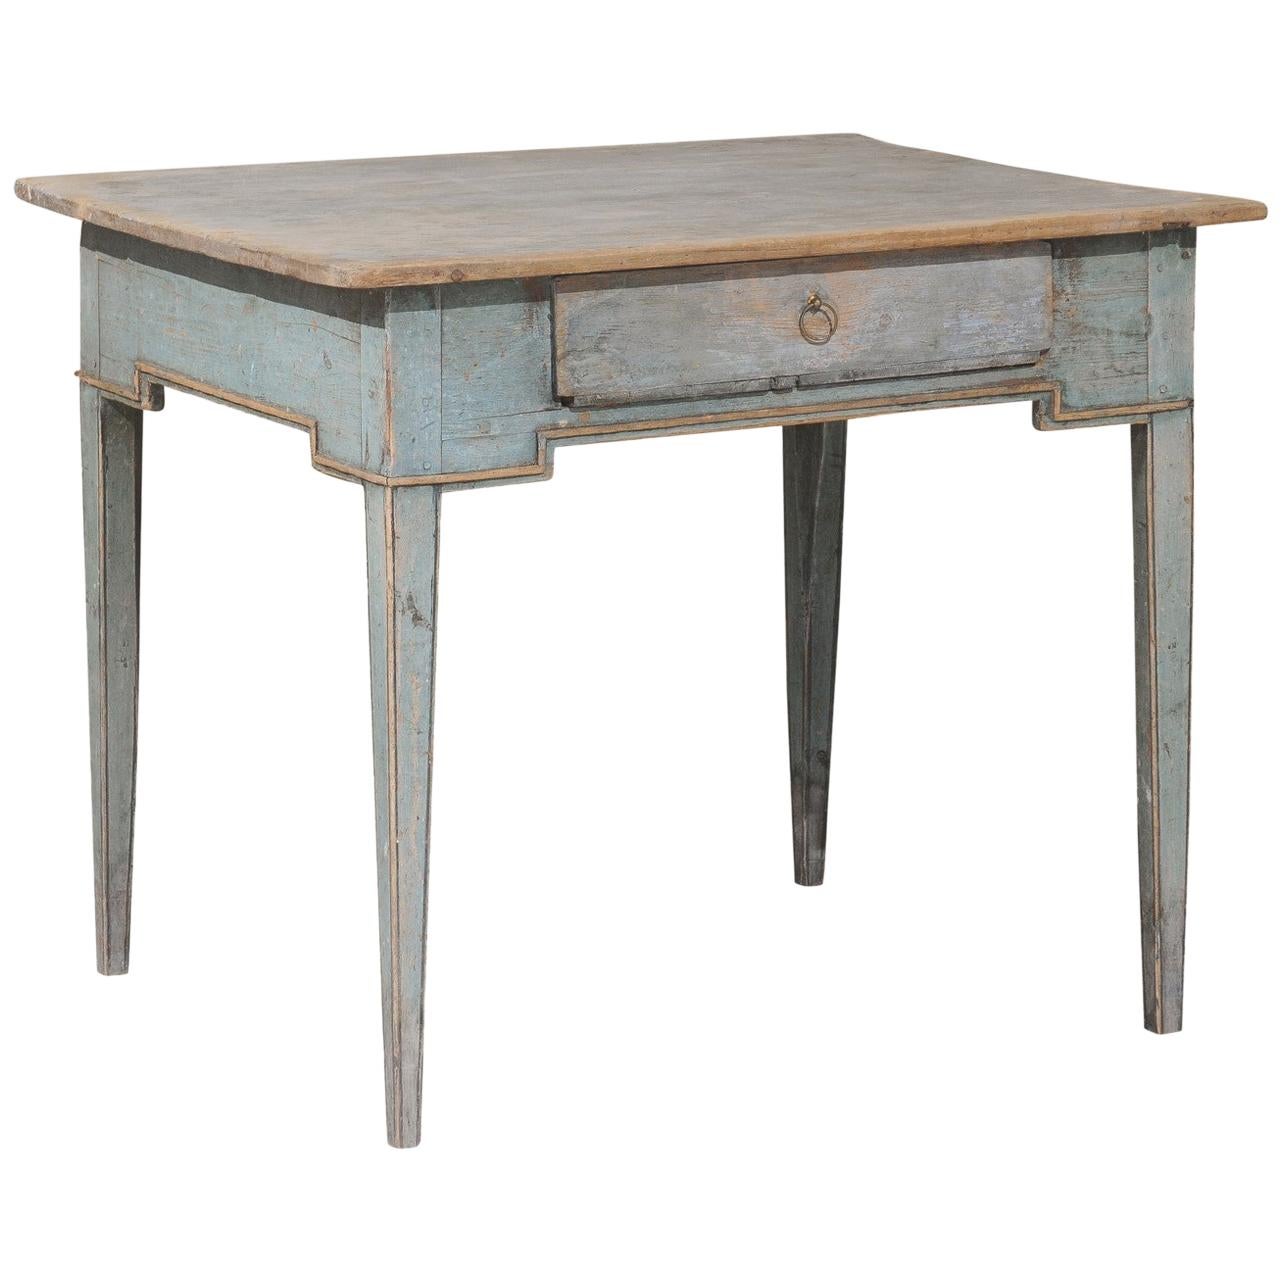 Swedish Provincial 1800s Painted Side Table with Single Drawer and Tapered Legs